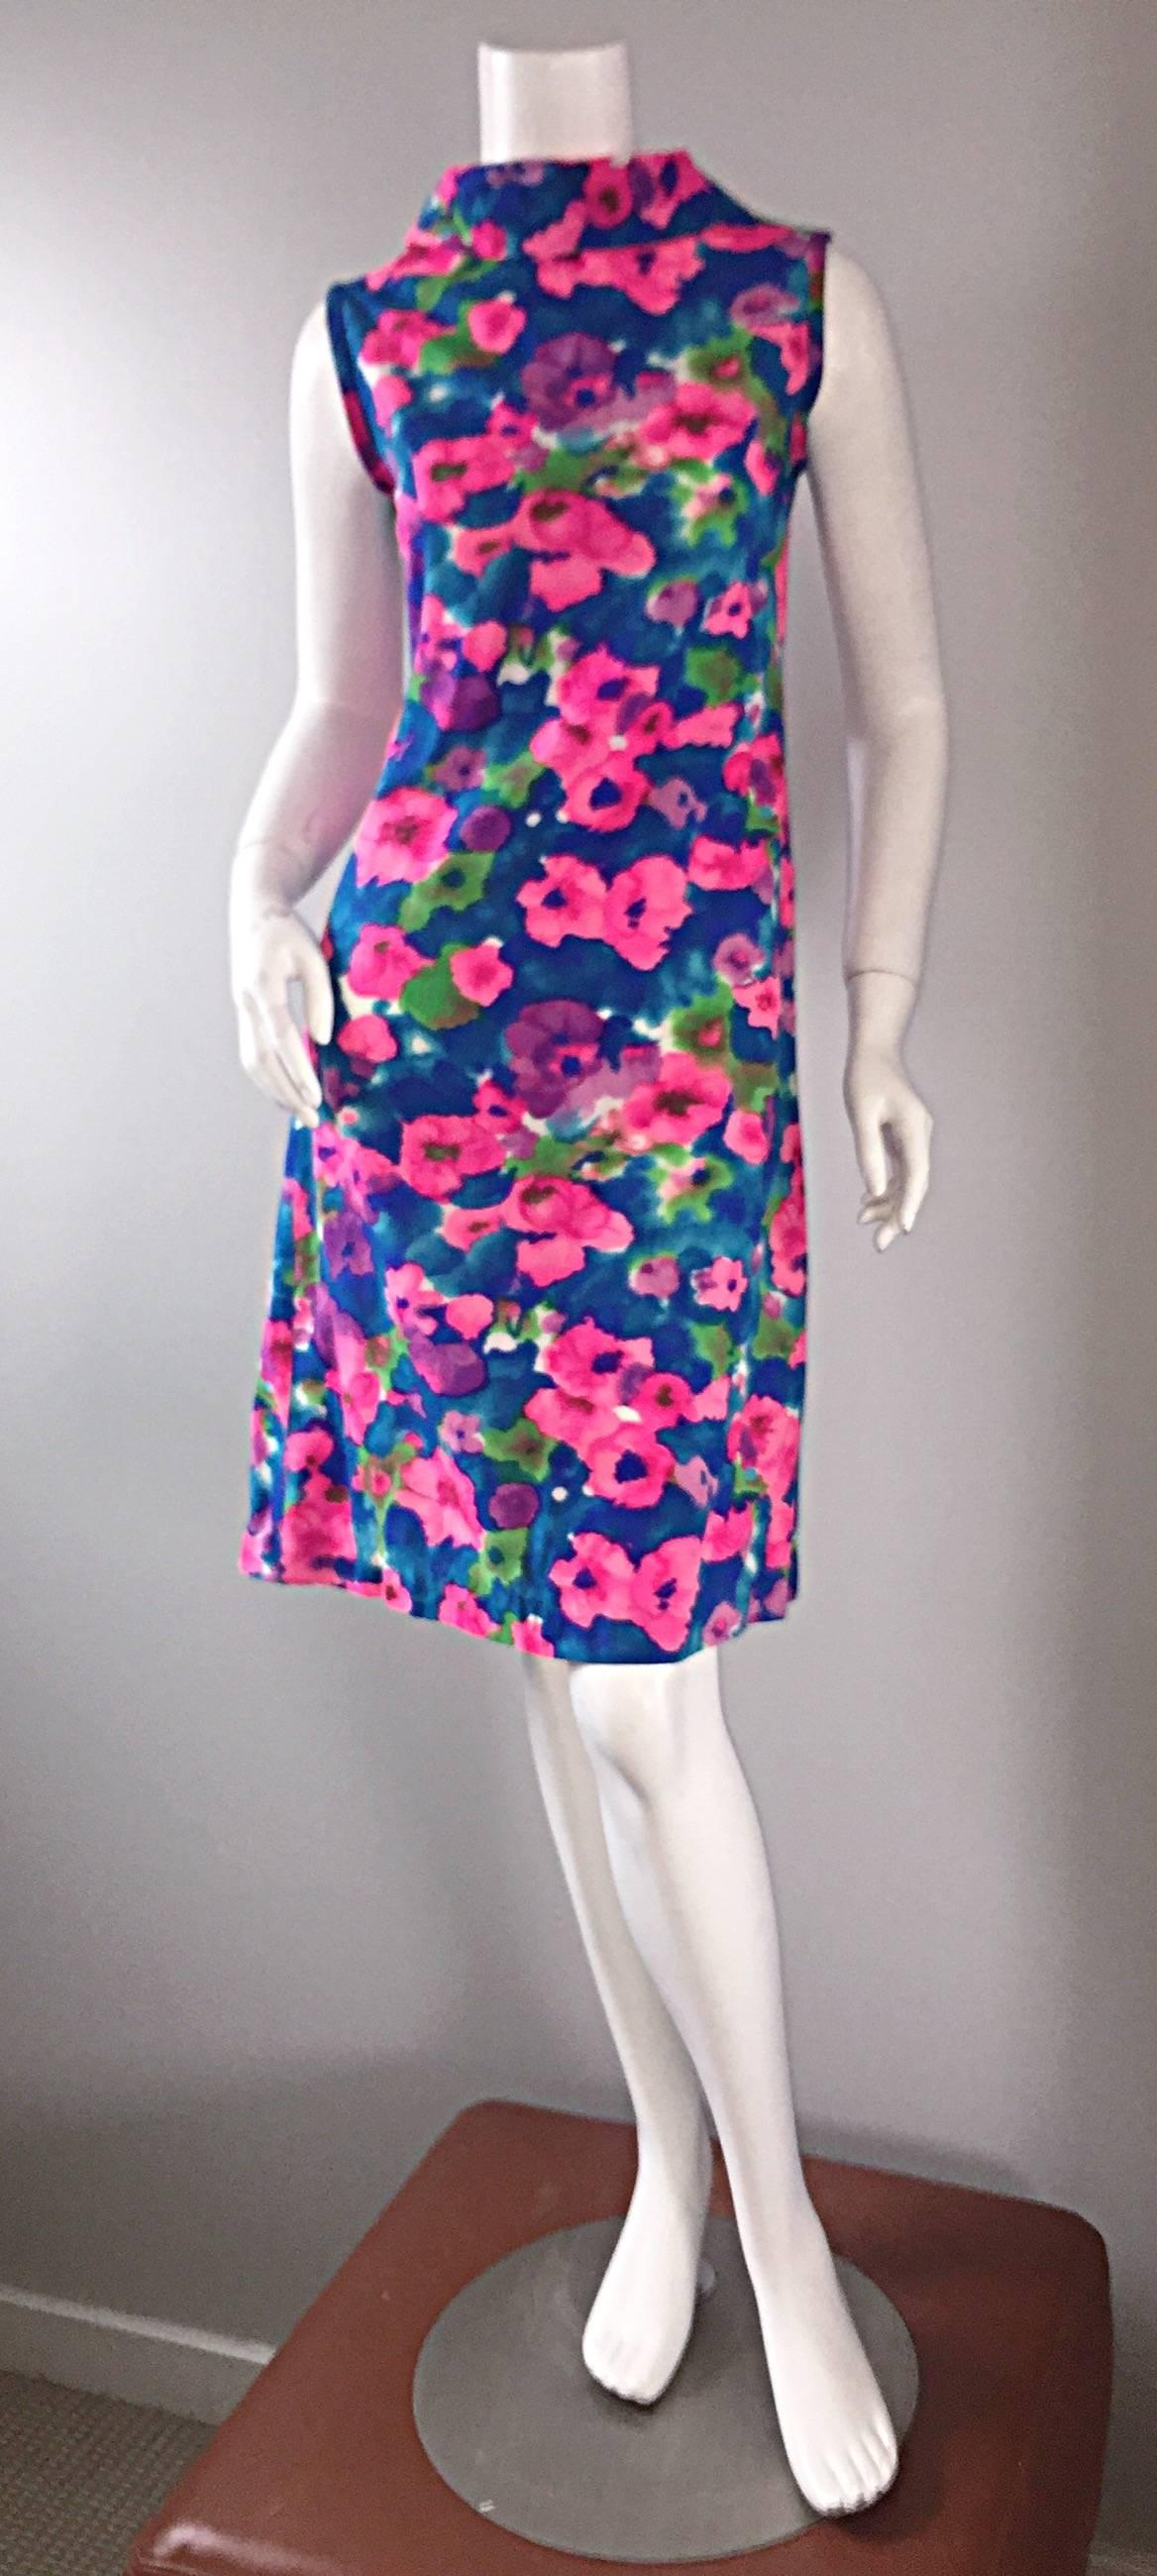 Chic 1960s watercolor floral dress! Beautiful vibrant colors of pink, purple, blue, green, and white, forming a wonderful floral watercolor print! Jackie-O style, with a high neck collar, and flared skirt. Luxurious cotton/silk blend, with a full